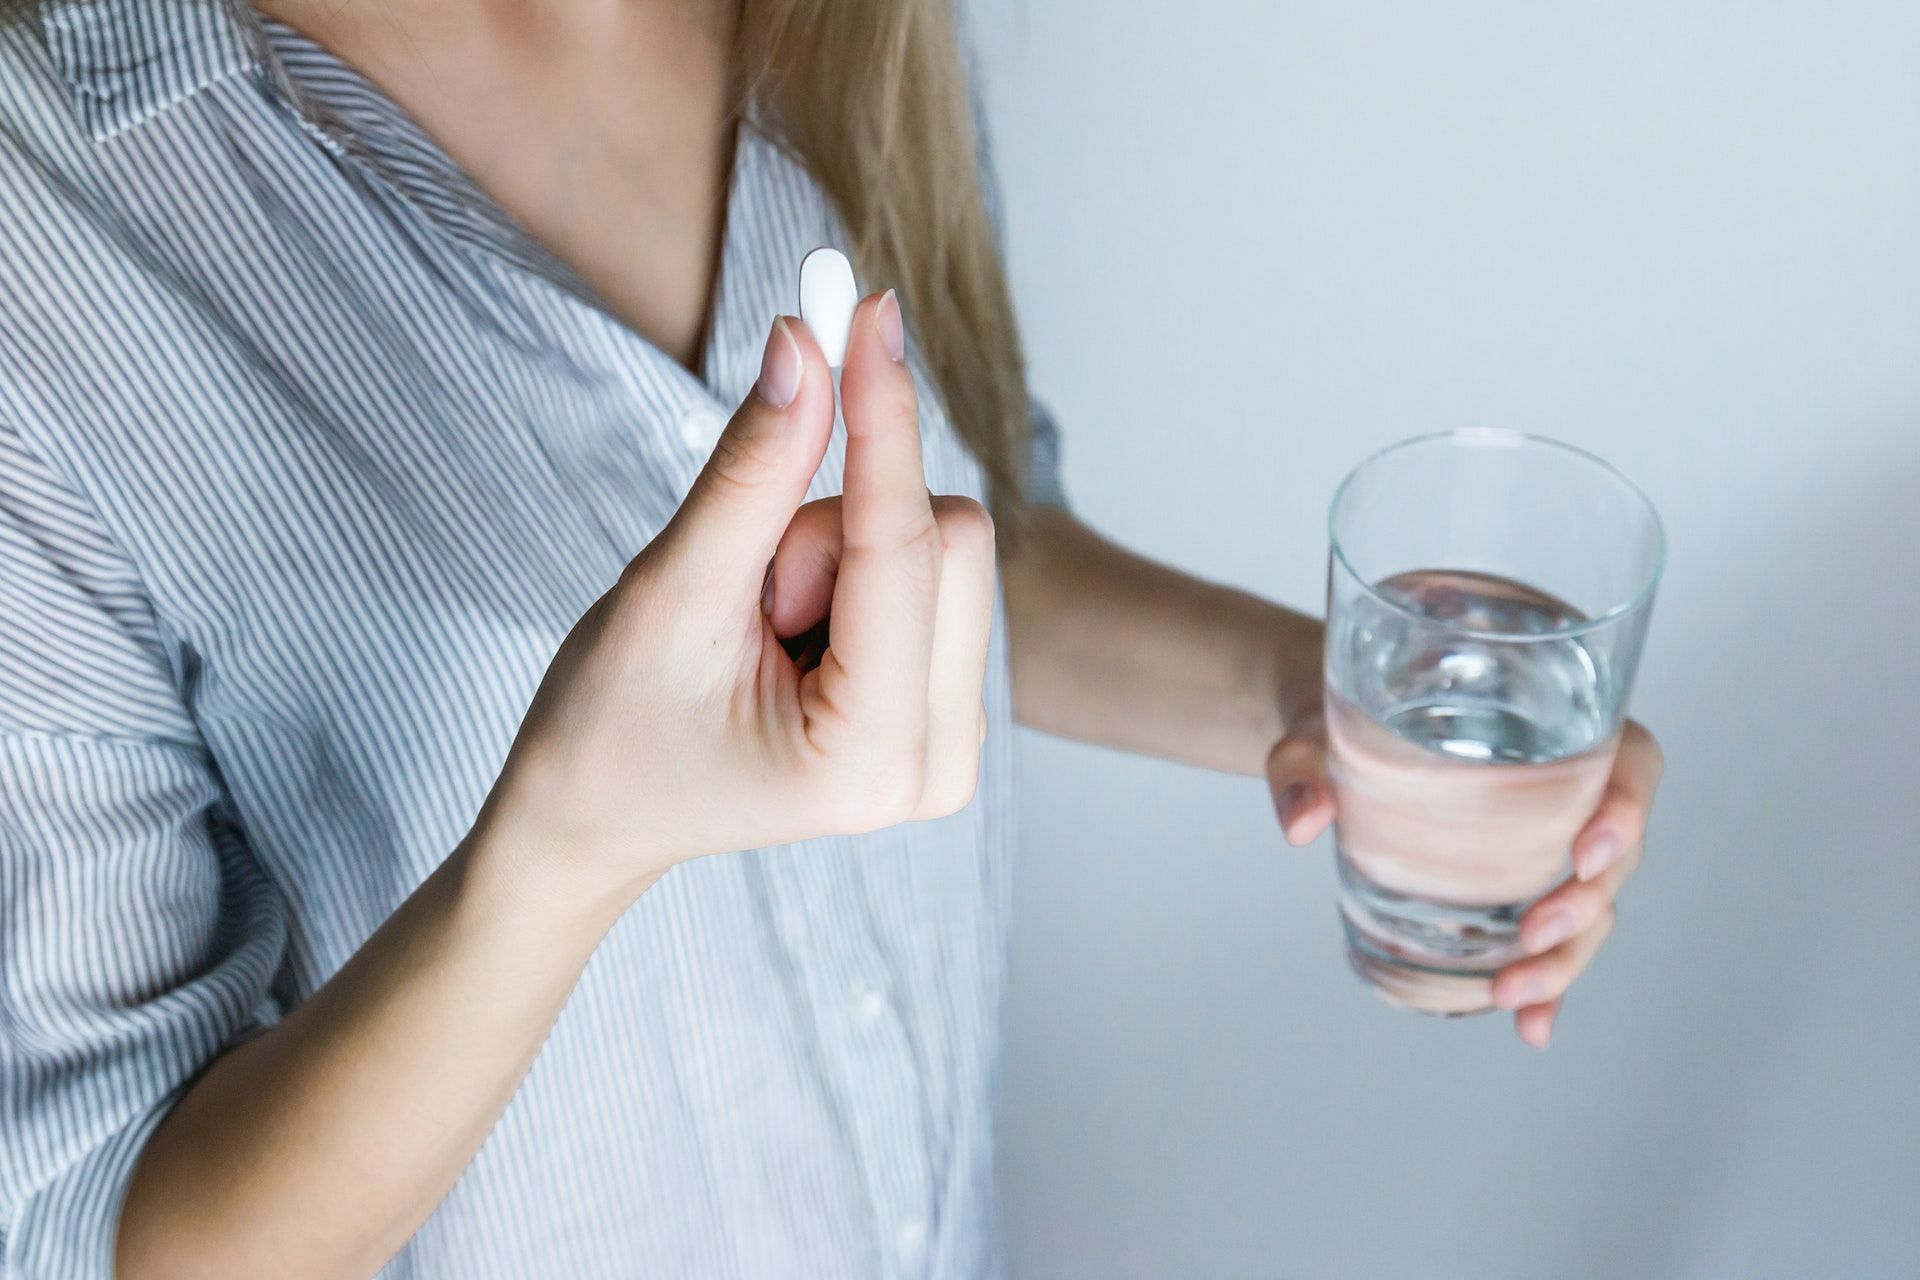 Magnesium citrate is available in liquid, powder, or capsule form. (Photo via Pexels/JESHOOTS.com)